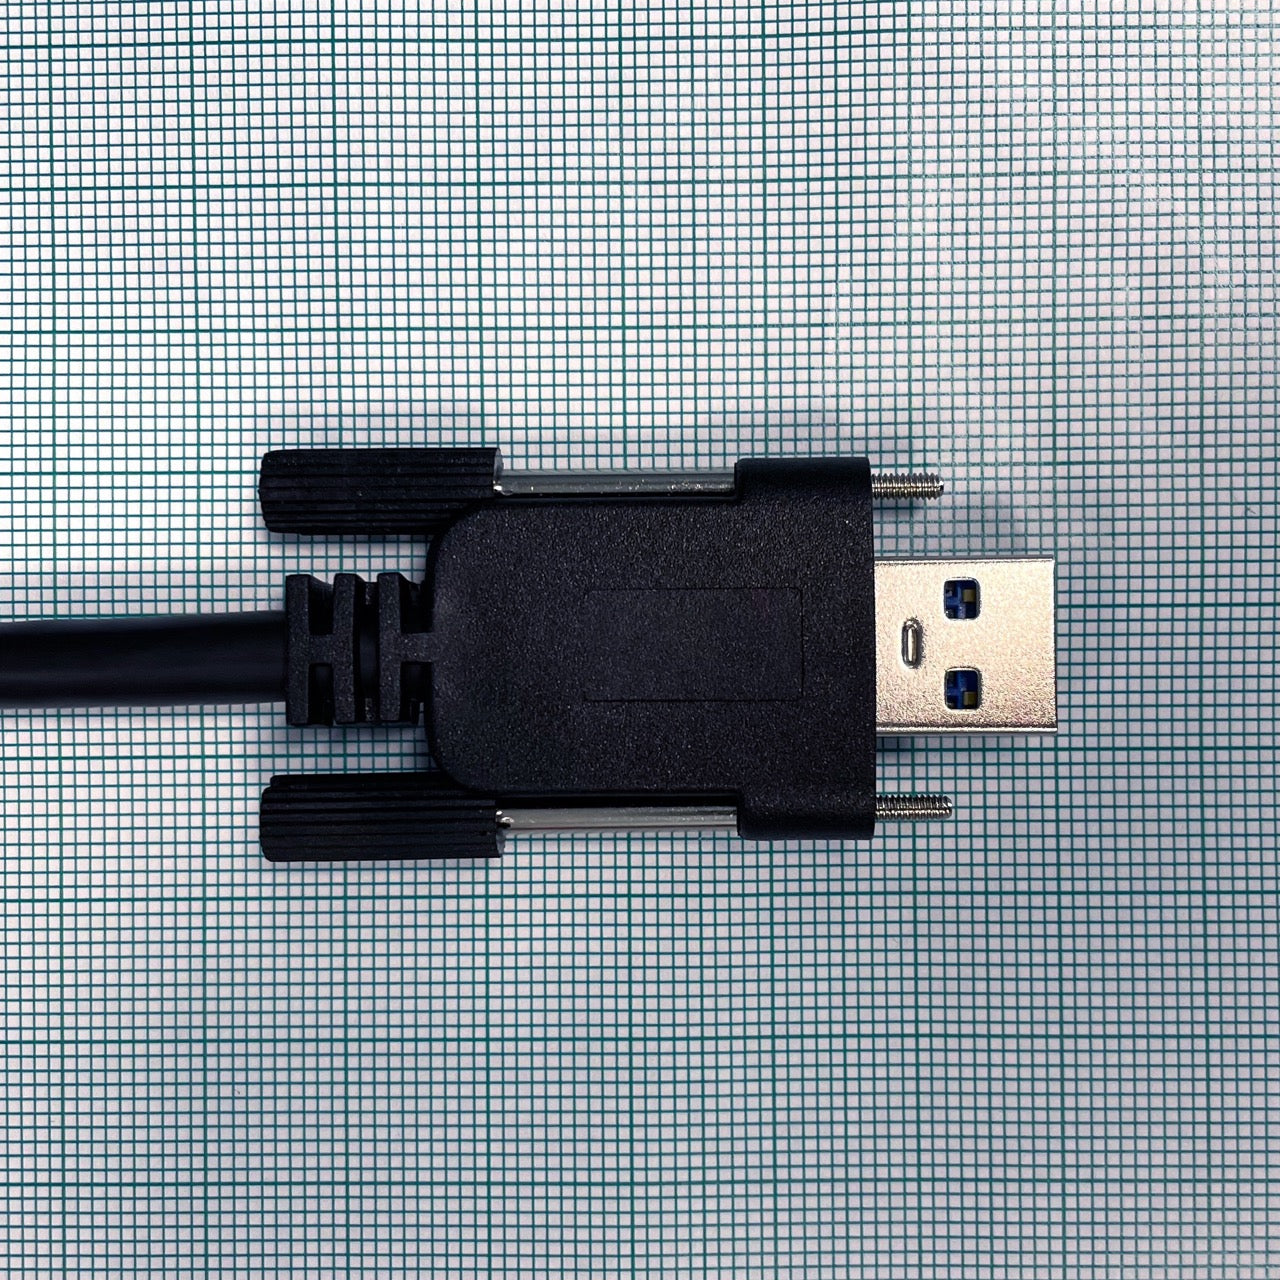 Top view of Type A USB 3.0 Vision screw lock connector